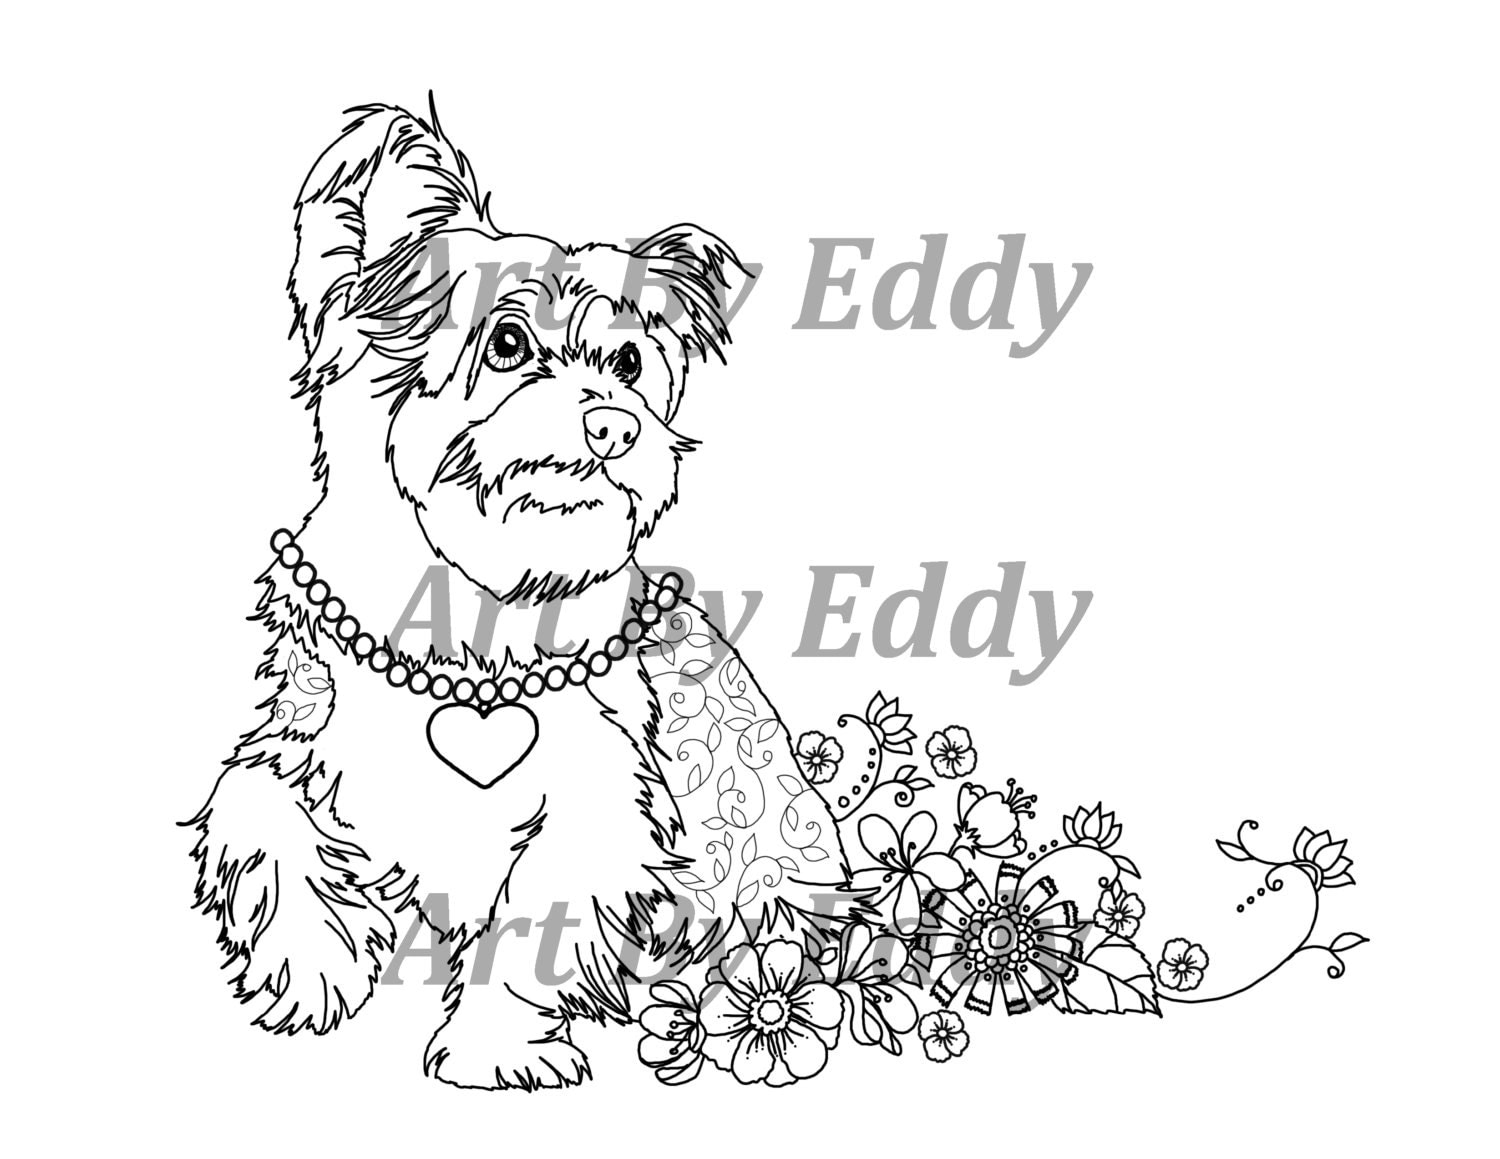 Art of Yorkie Single Coloring Page